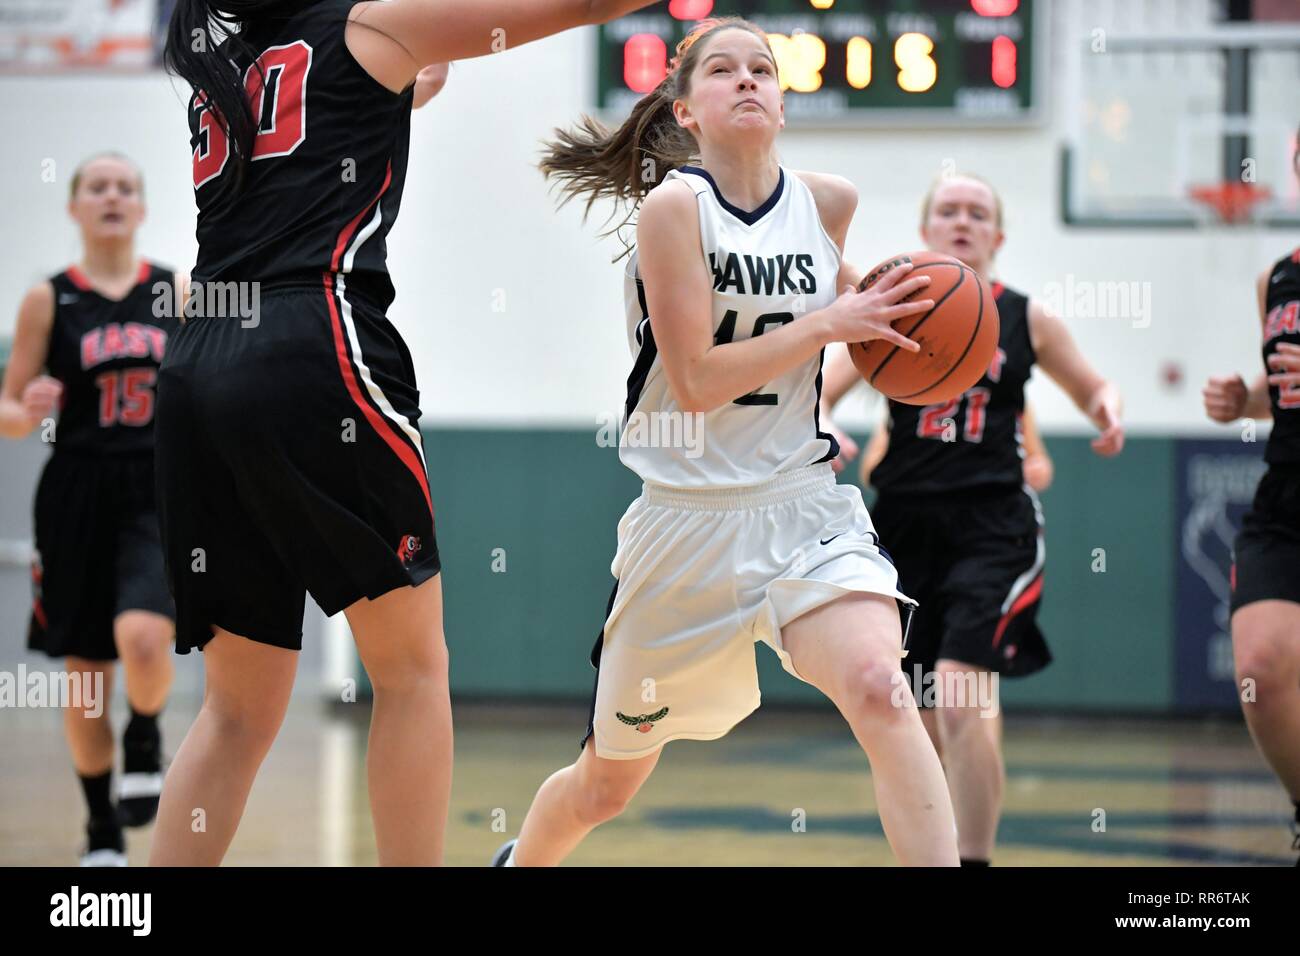 Player driving through the paint and on a defending opponent on her way to scoring two points. USA. Stock Photo